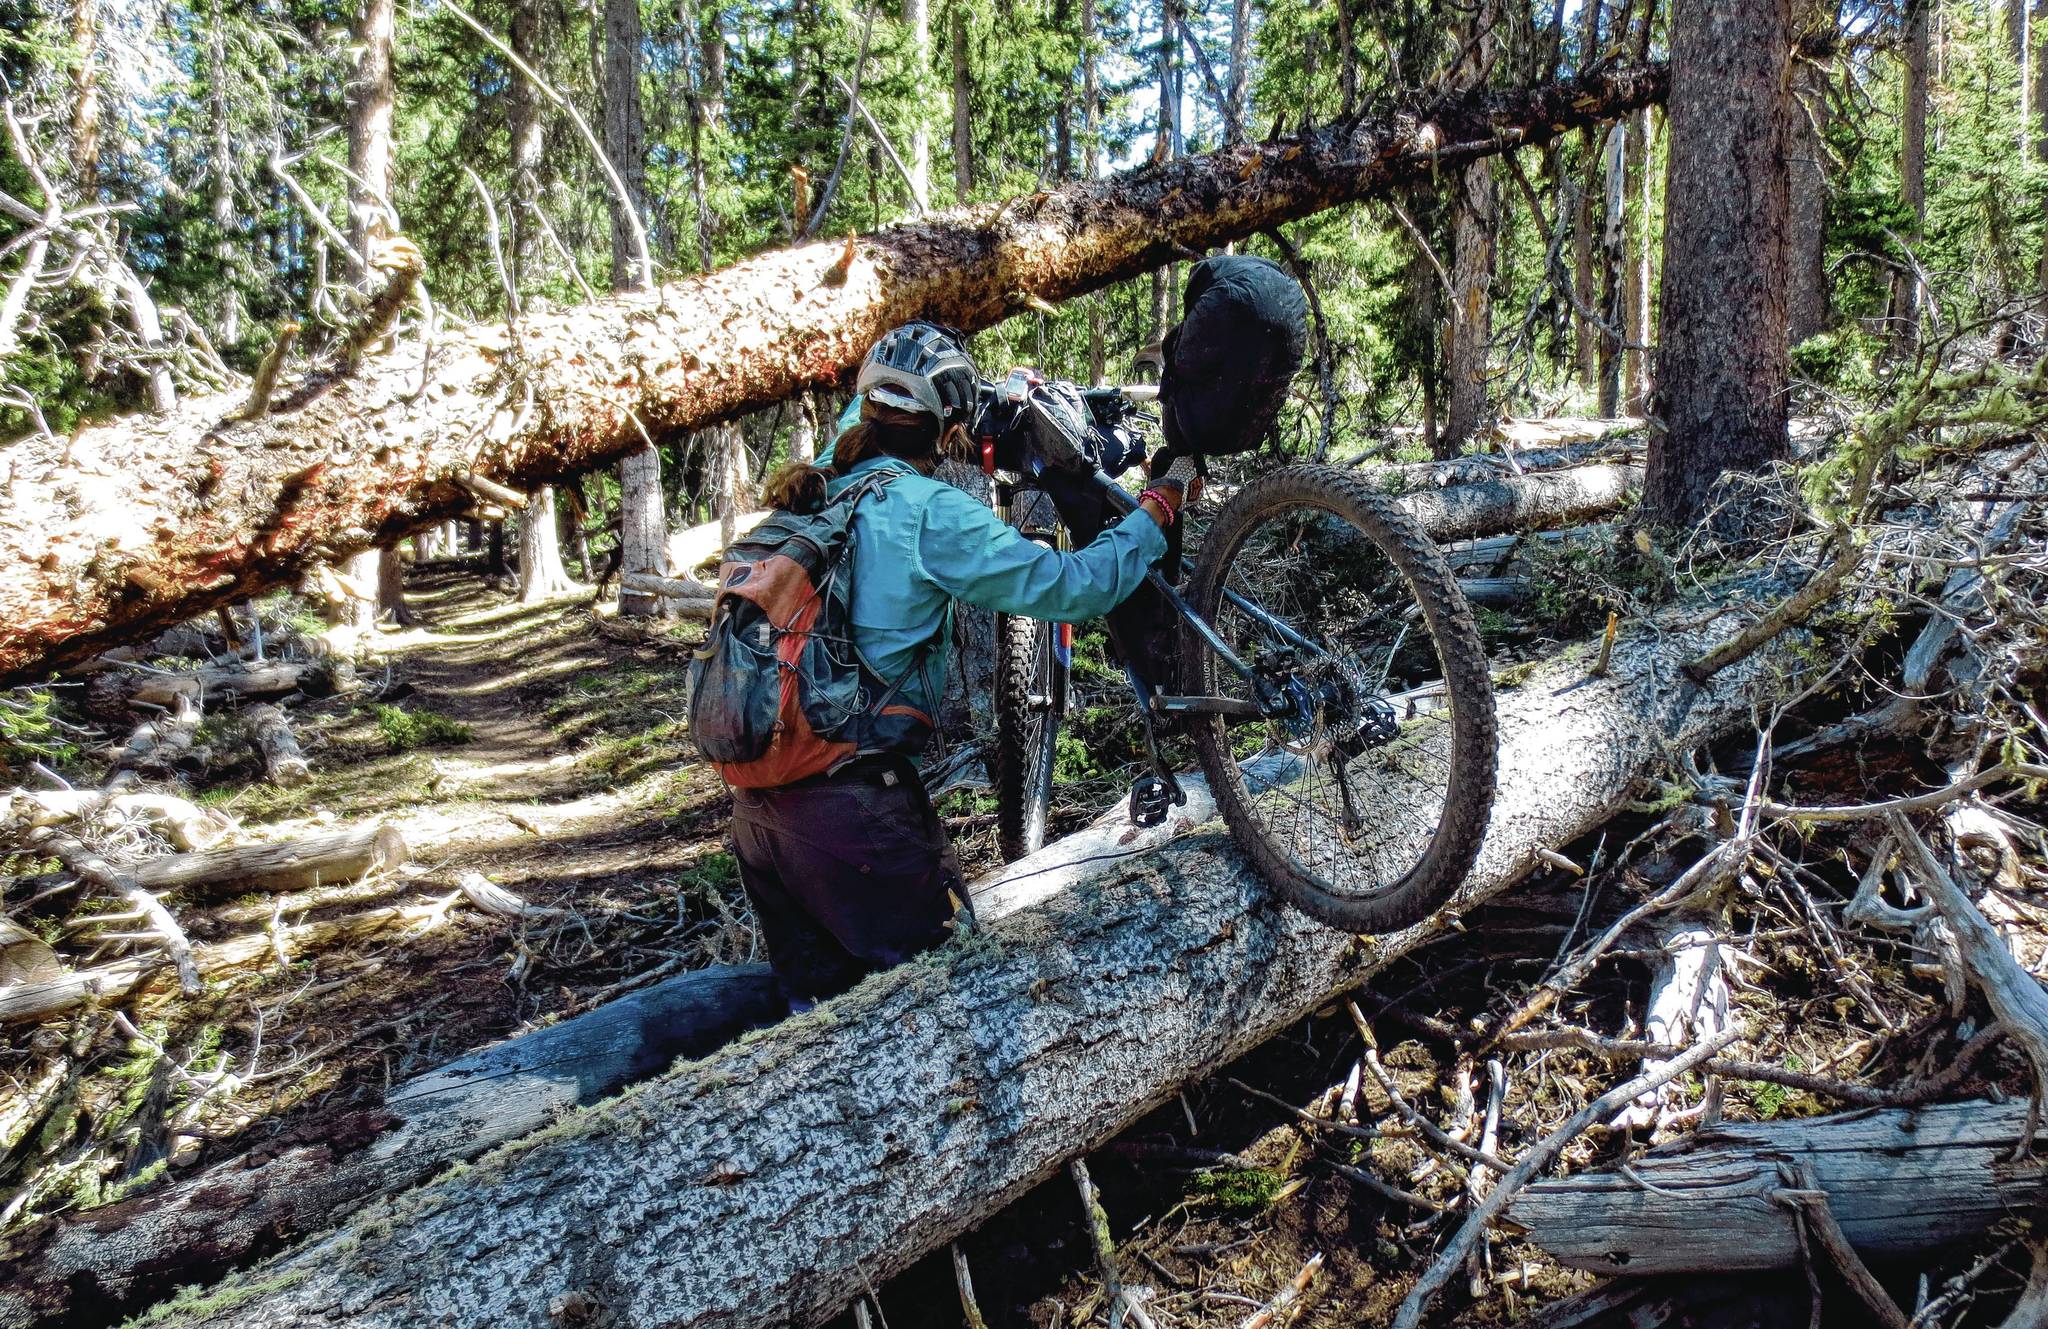 Bikepacking adds a dose of fun to backpacking